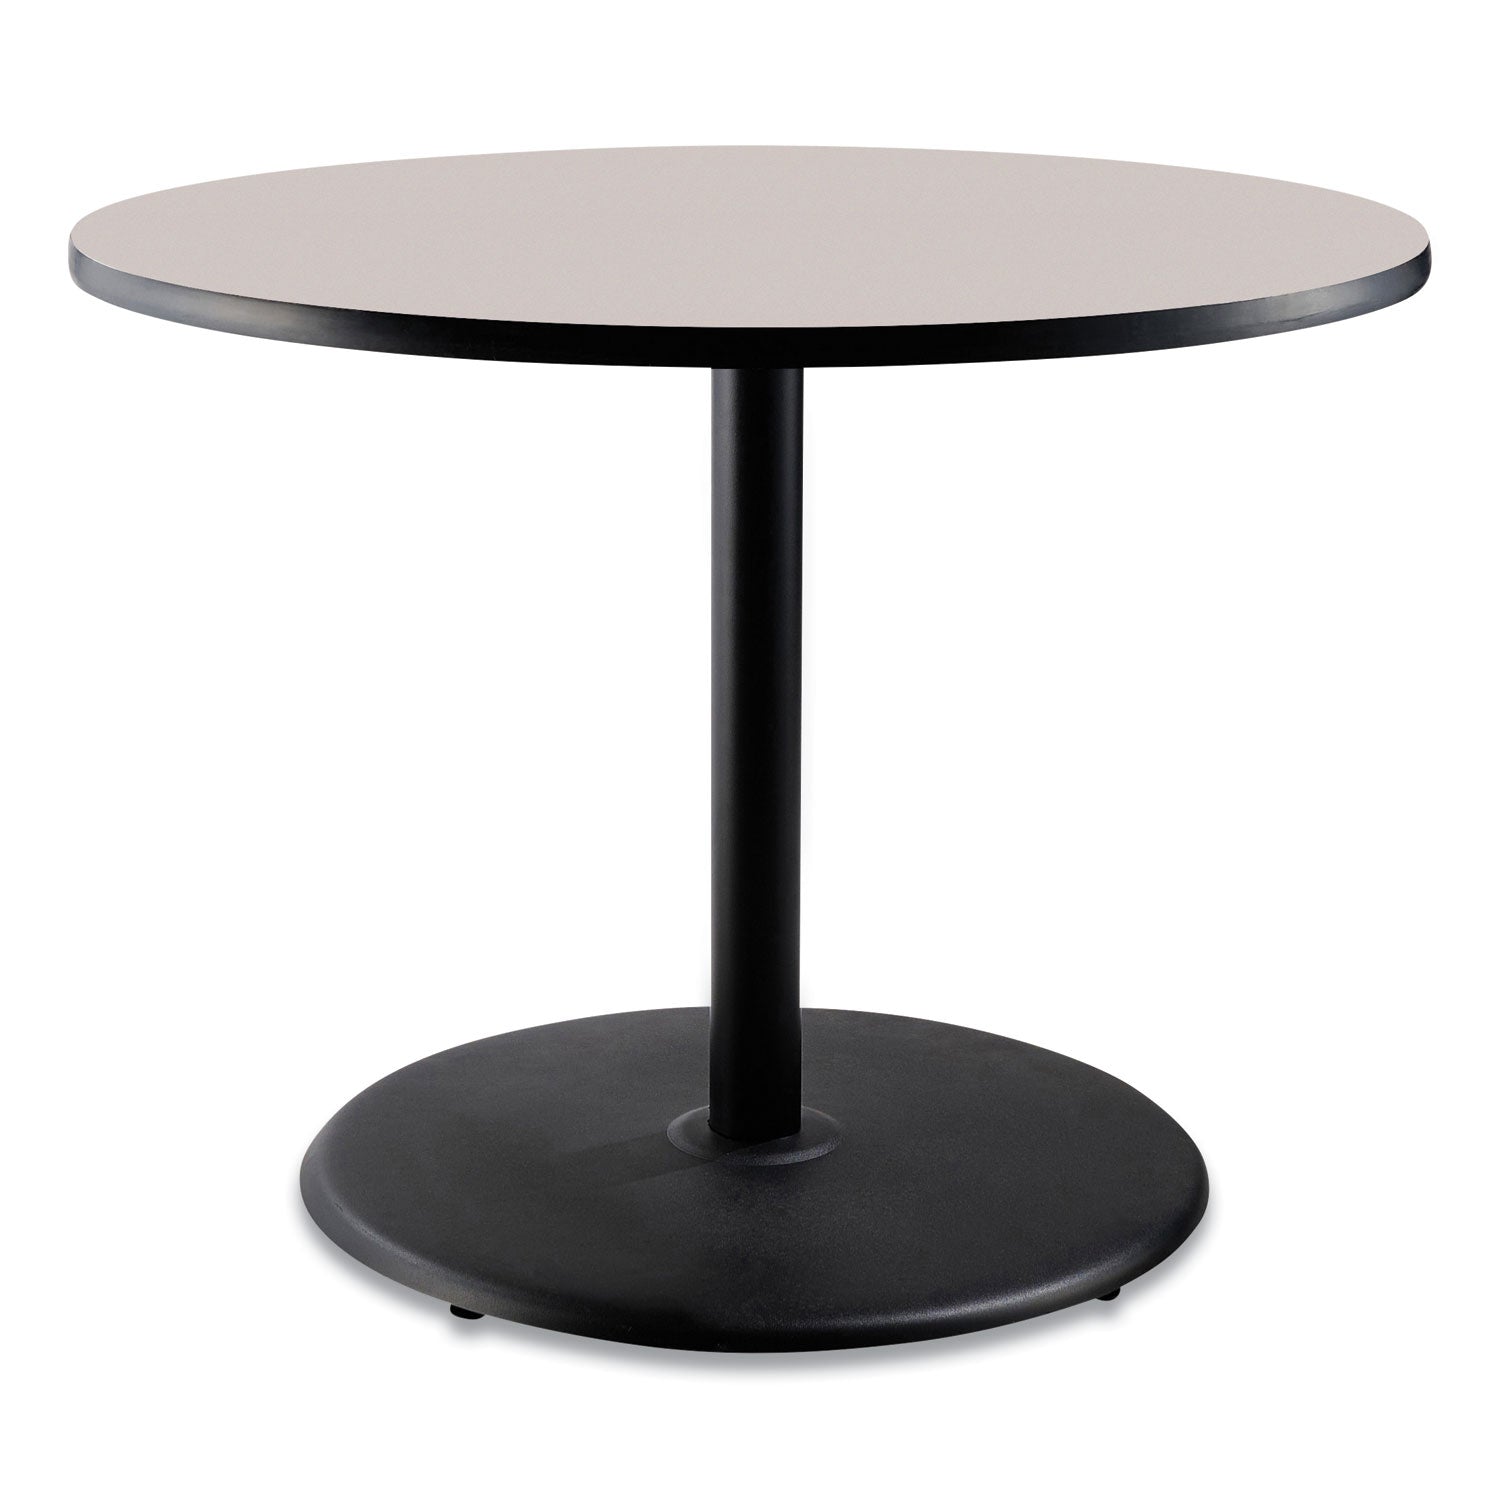 cafe-table-36-diameter-x-30h-round-top-base-gray-nebula-top-black-base-ships-in-7-10-business-days_npsct13636rd1gy - 1